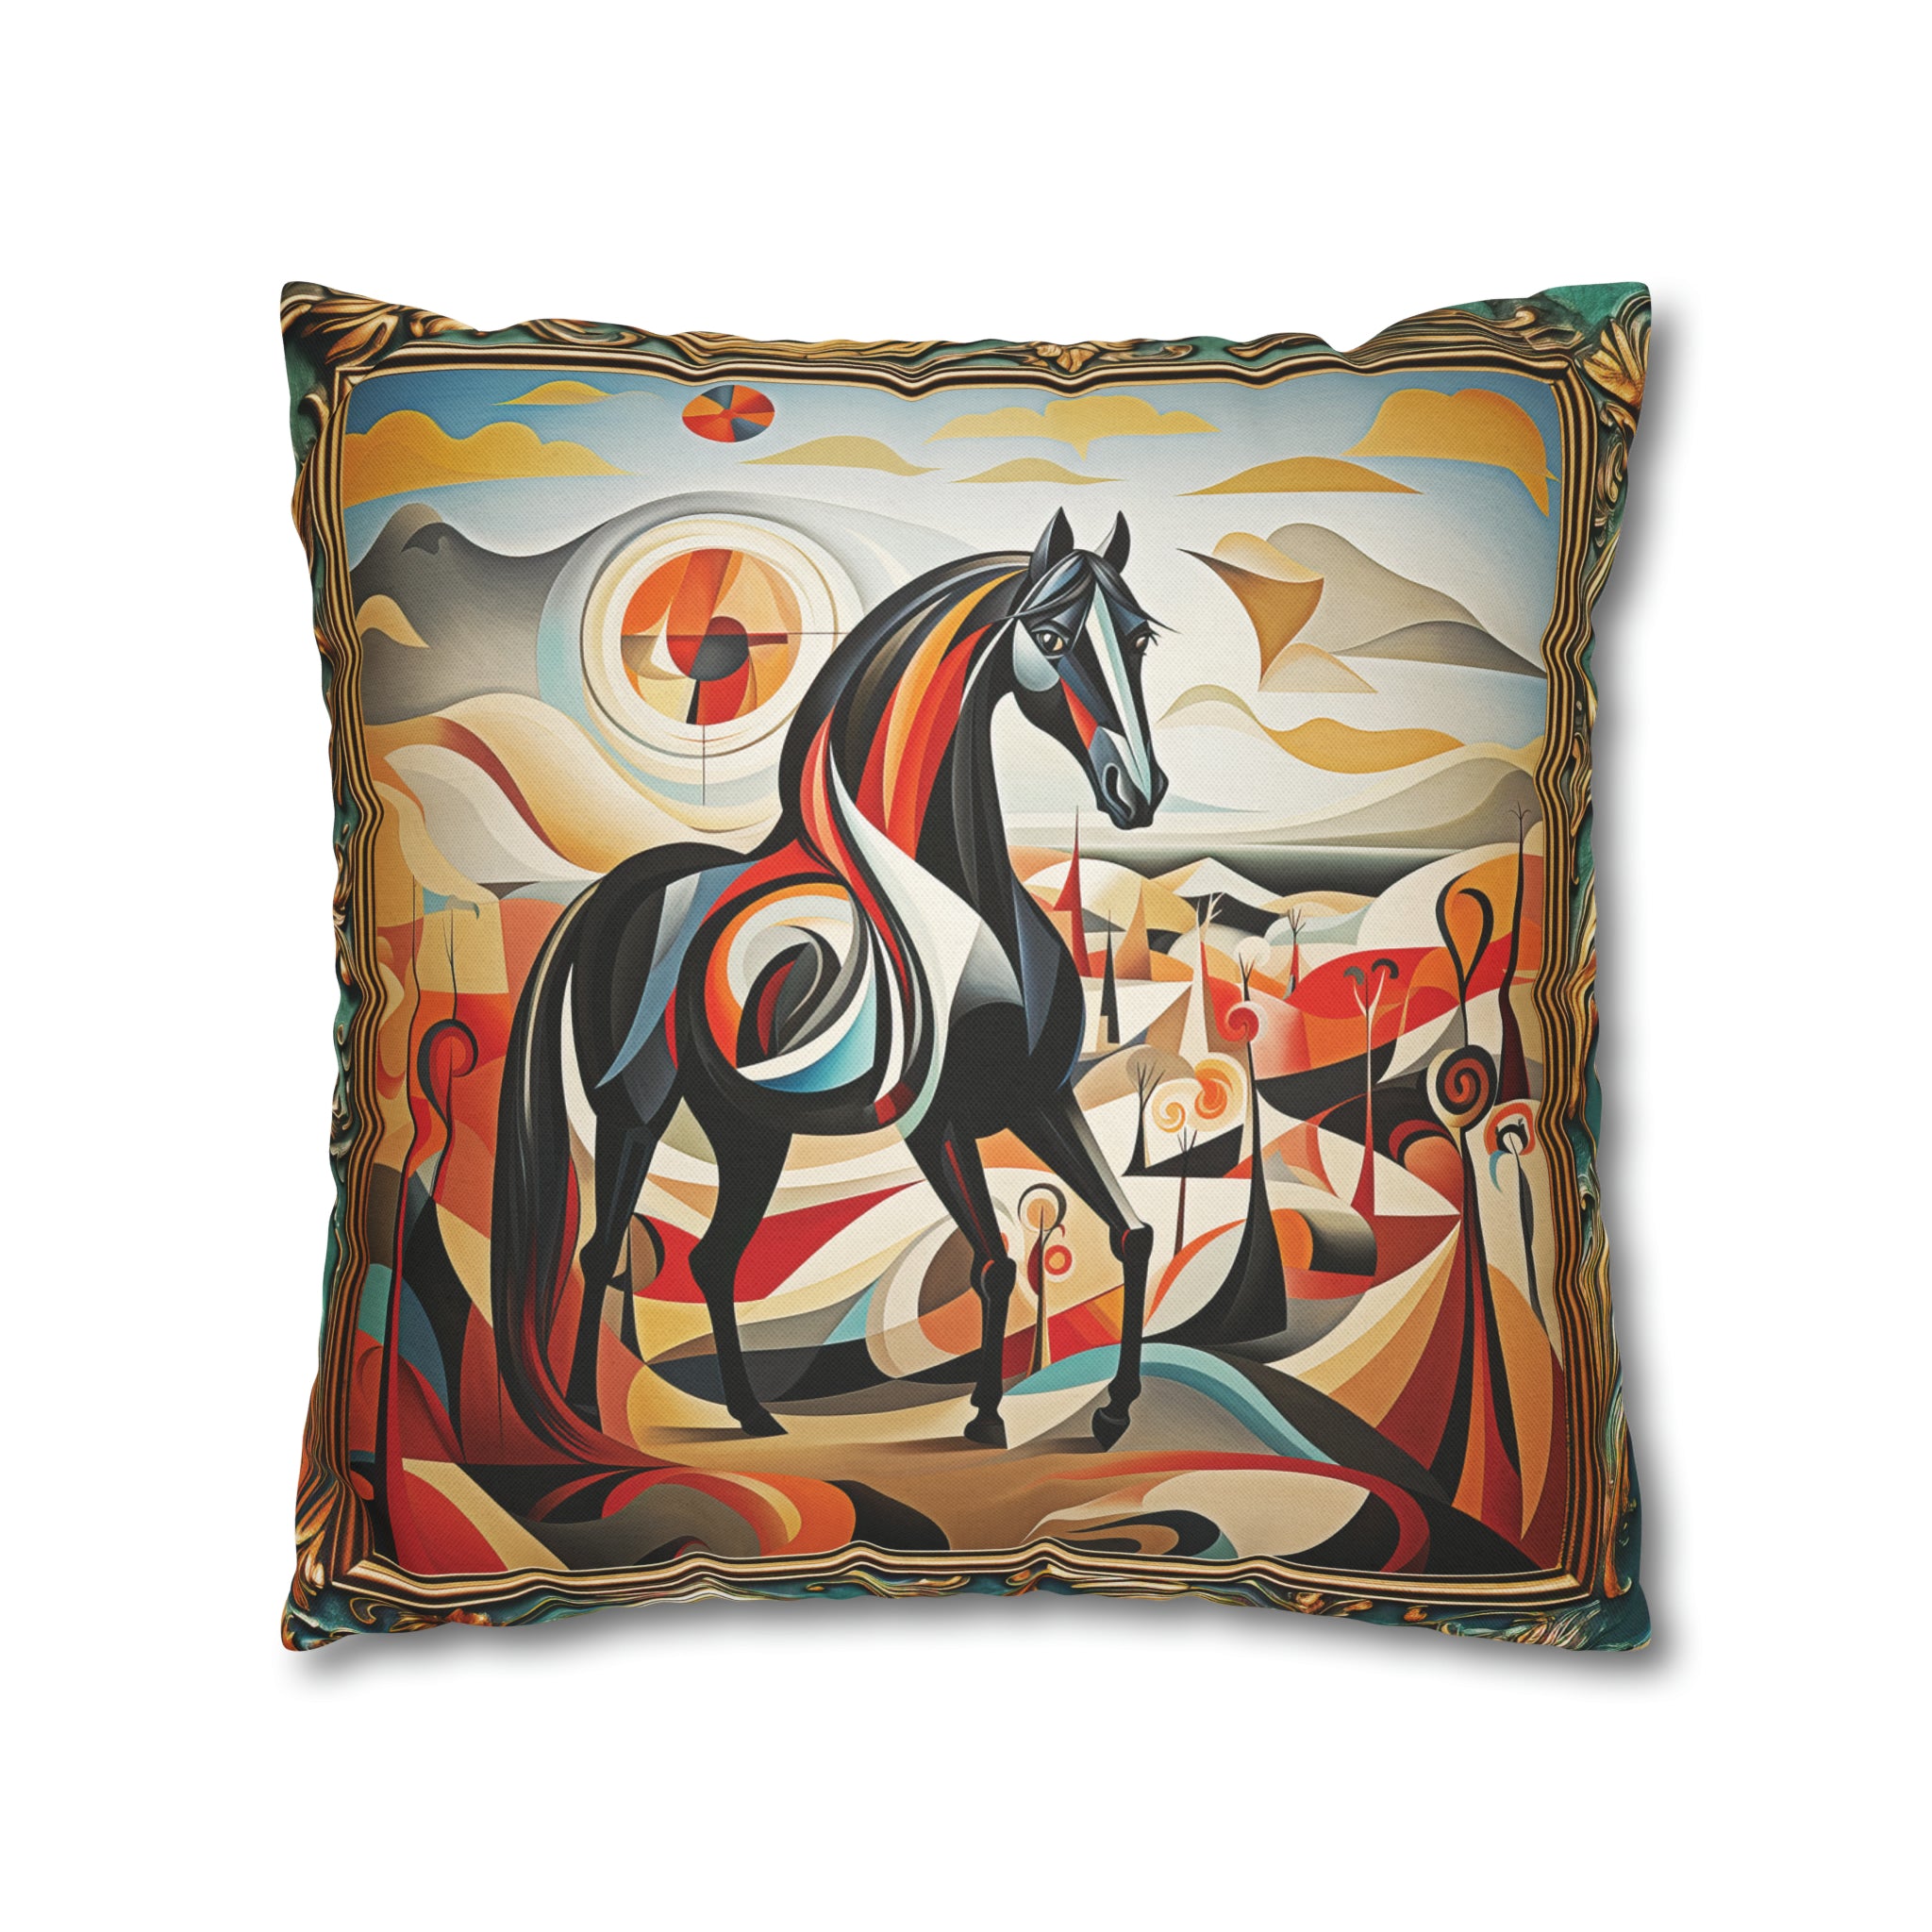 Square Pillow Case 18" x 18", CASE ONLY, no pillow form, original Art ,Colorful, Beautiful Cubist Style Horse on a colorful Landscape with Mountains